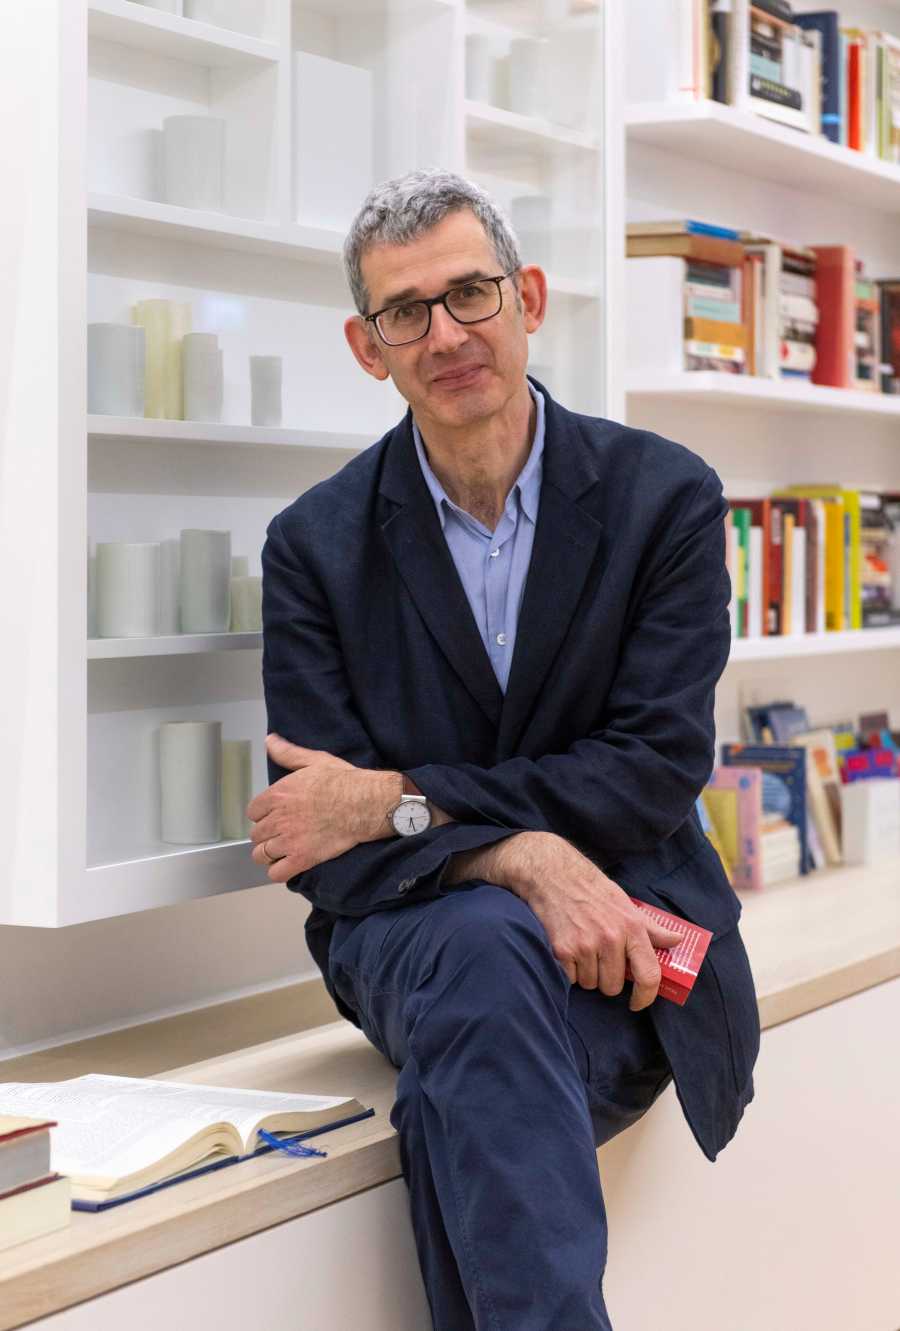 8. Edmund de Waal library of exile at the British Museum 2020 c. The Trustees of the British Museum